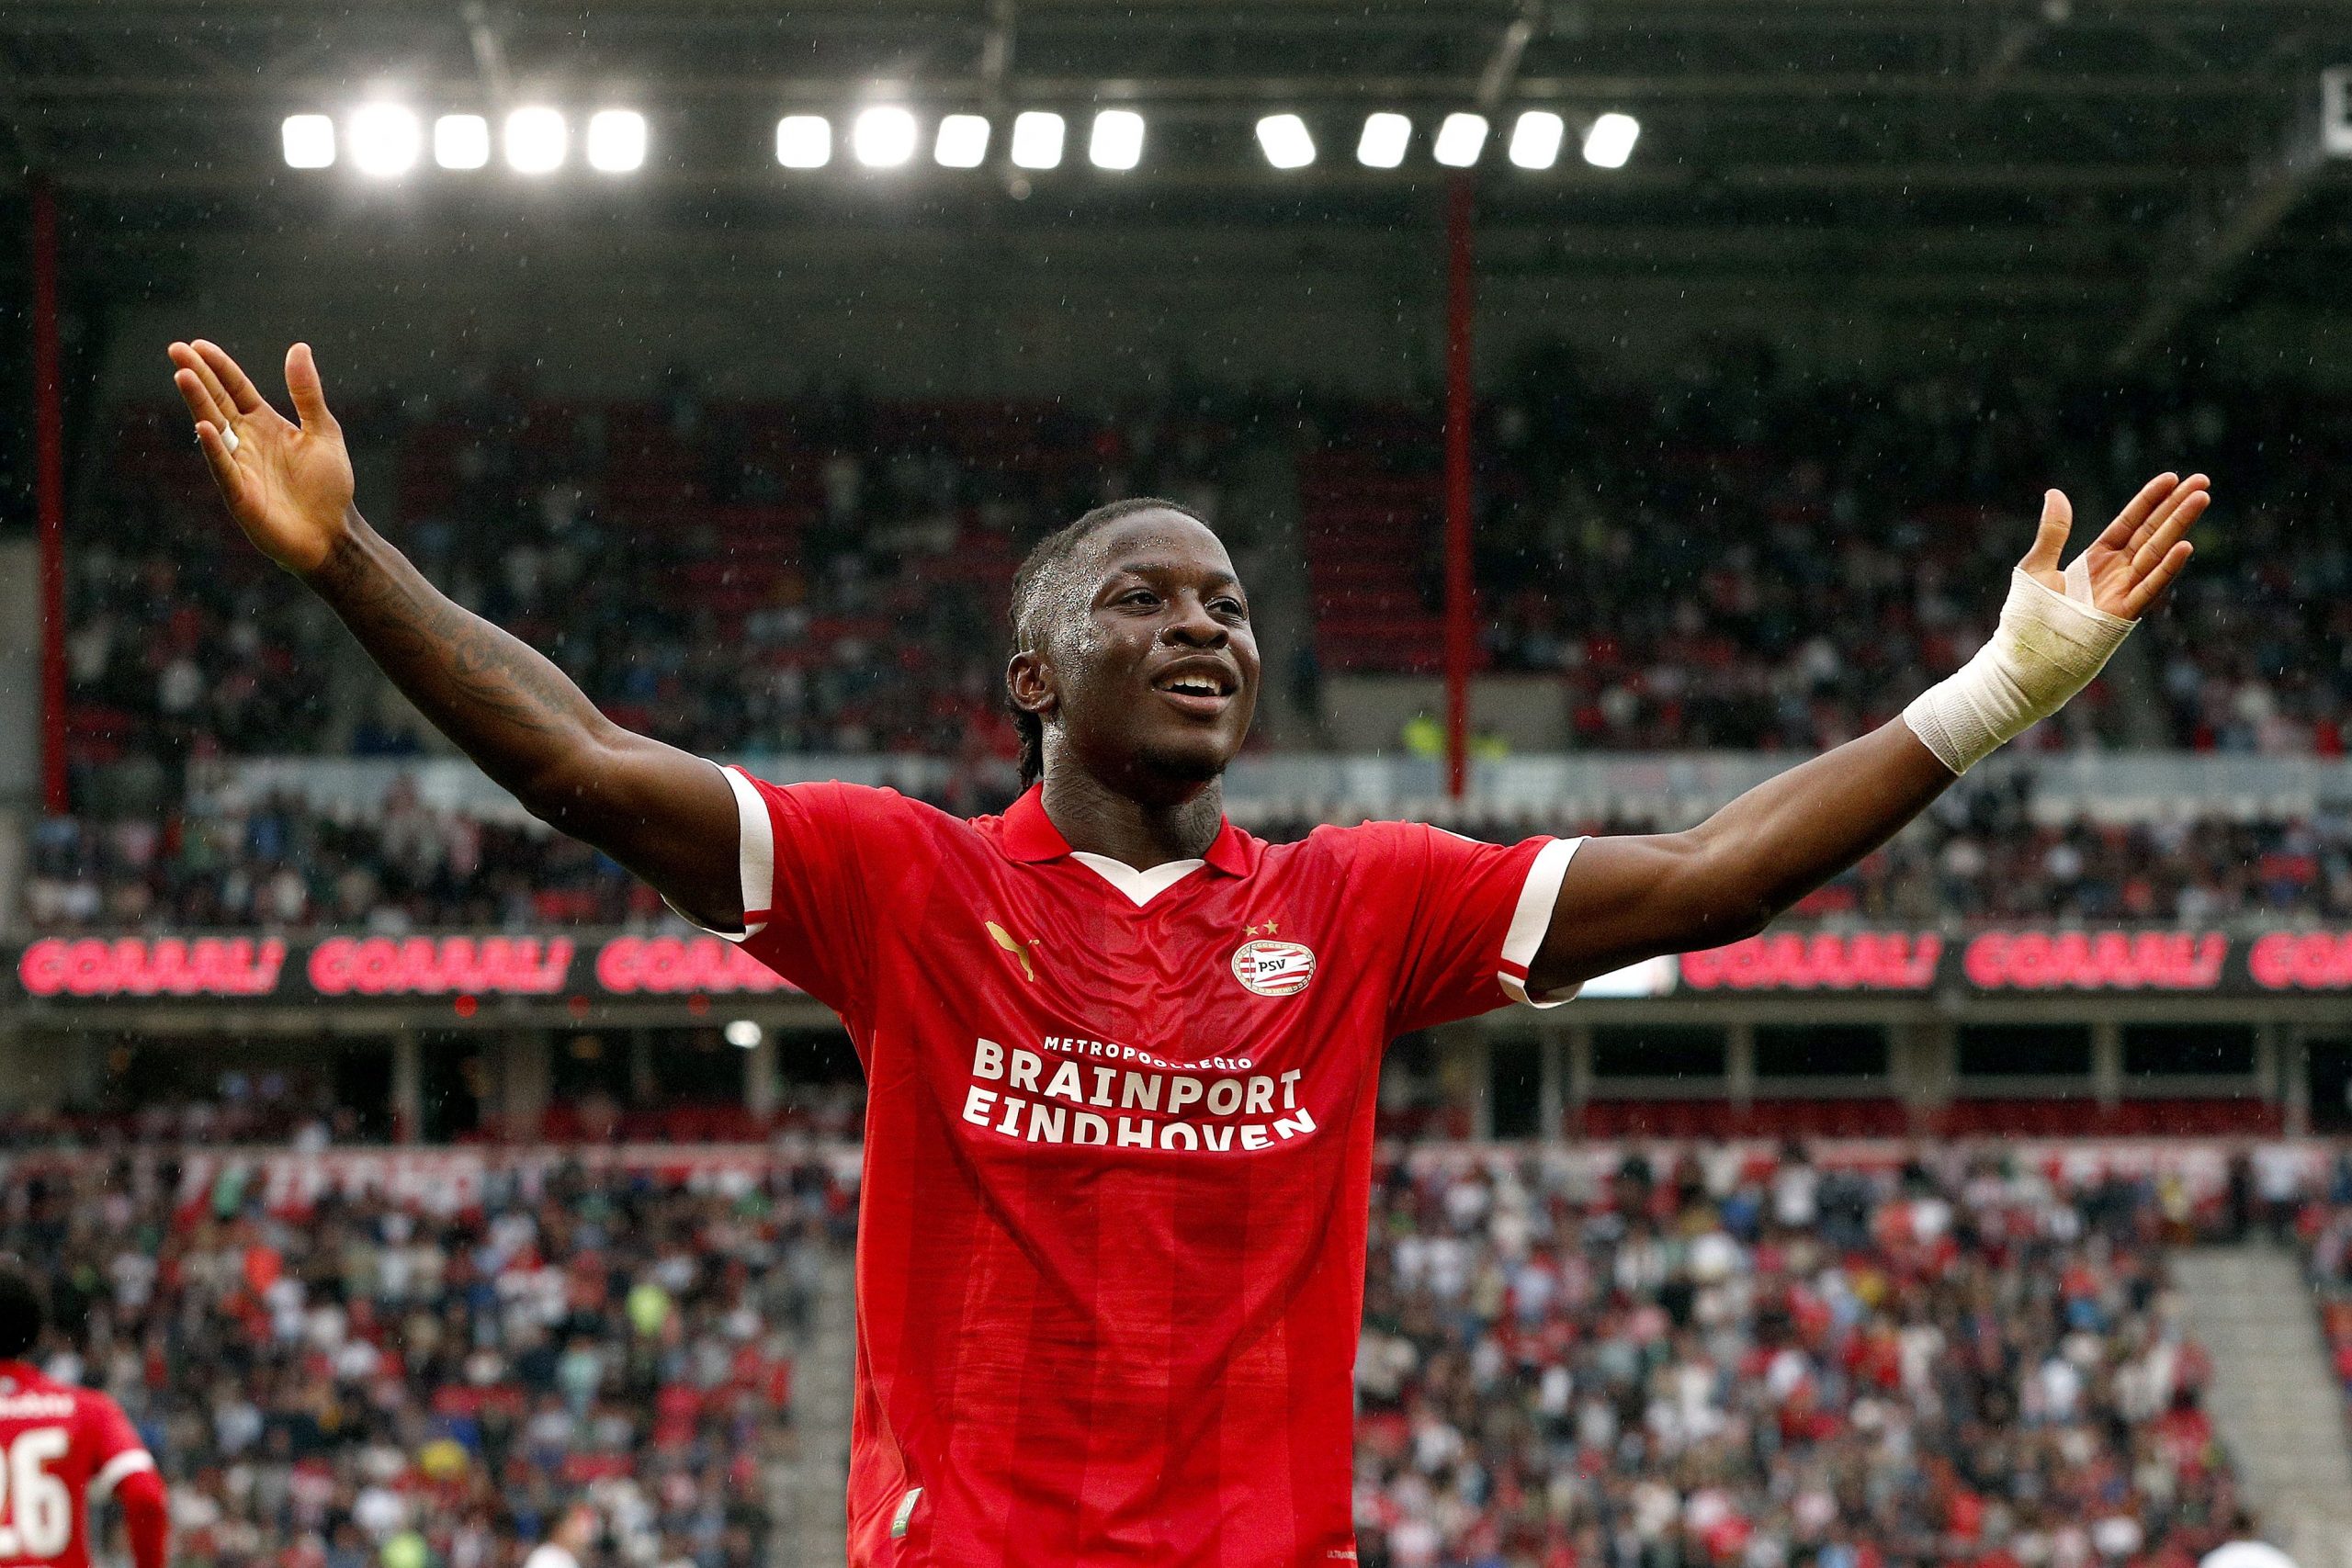 PSV's Belgian forward Johan Bakayoko celebrates after scoring the team's first goal during a friendly match between PSV Eindhoven and Nottingham Forest FC at Phillips stadium in Eindhoven, July 30, 2023. (Photo by Jeroen Putmans / ANP / AFP) / Netherlands OUT (Photo by JEROEN PUTMANS/ANP/AFP via Getty Images)